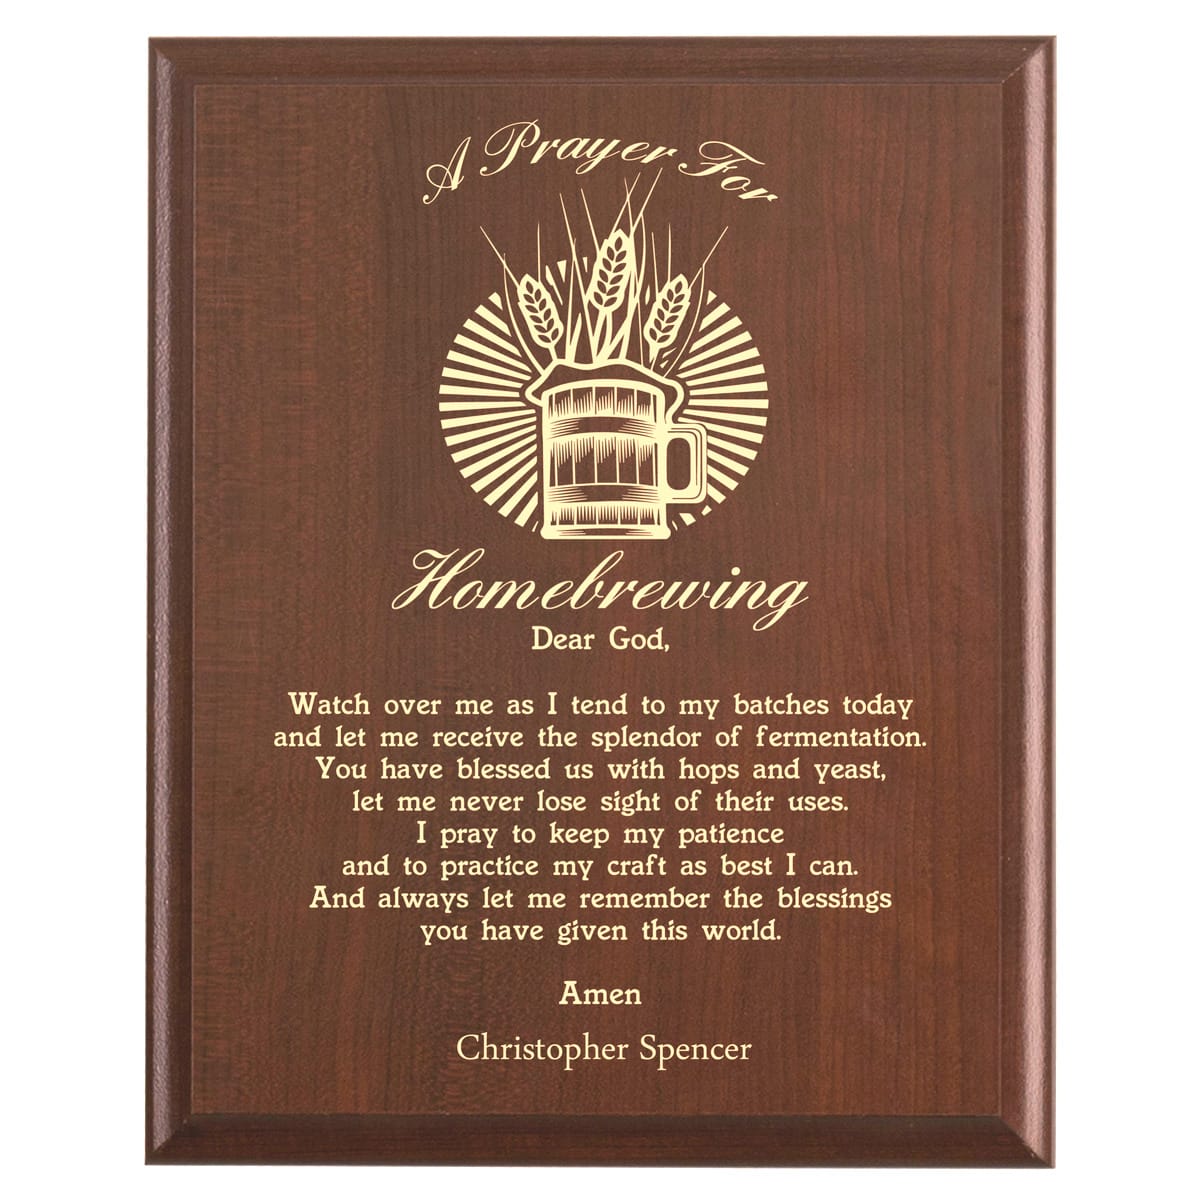 Plaque photo: Homebrewing Prayer Plaque design with free personalization. Wood style finish with customized text.